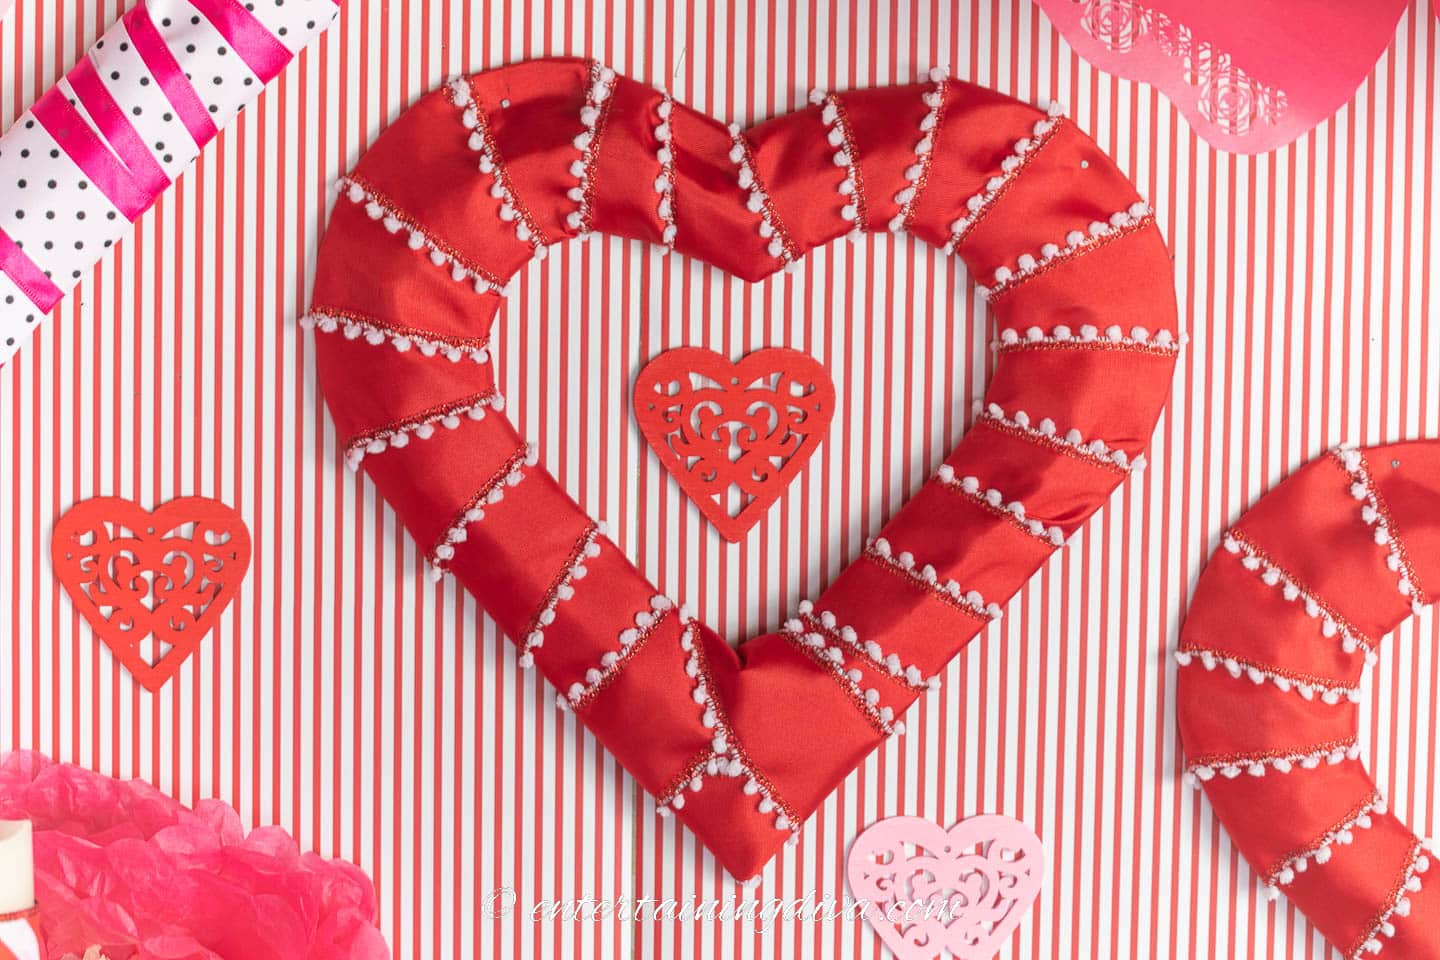 DIY red heart wreath hung on a wall with red and whit stripes in the background